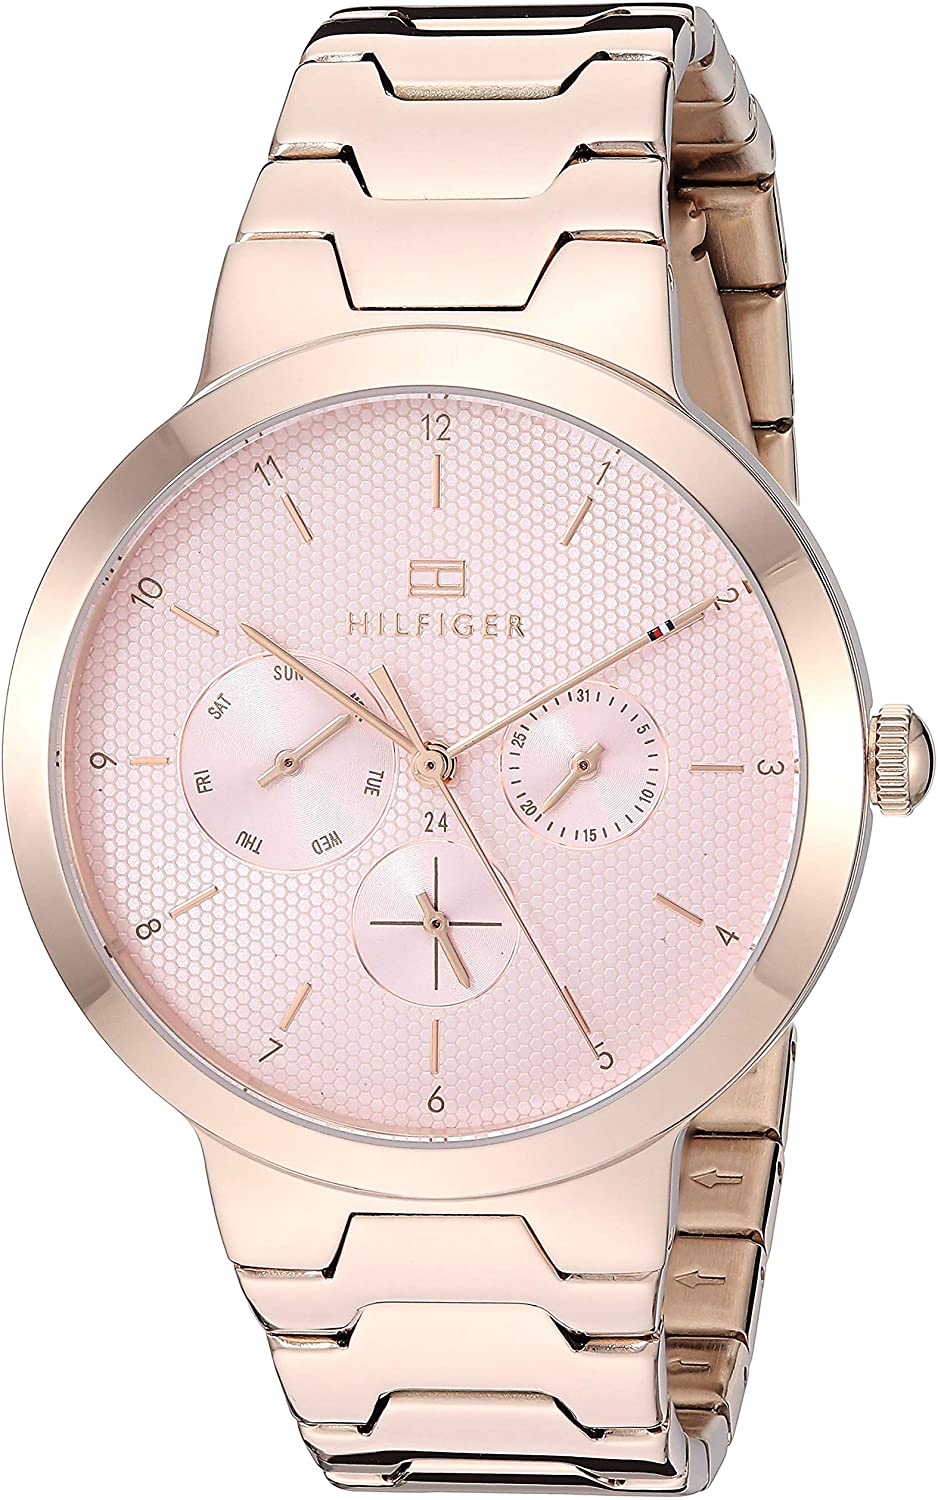 Tommy Hilfiger Women's Quartz Watch with Stainless Steel Strap, Carnation, 18 (Model: 1782076)